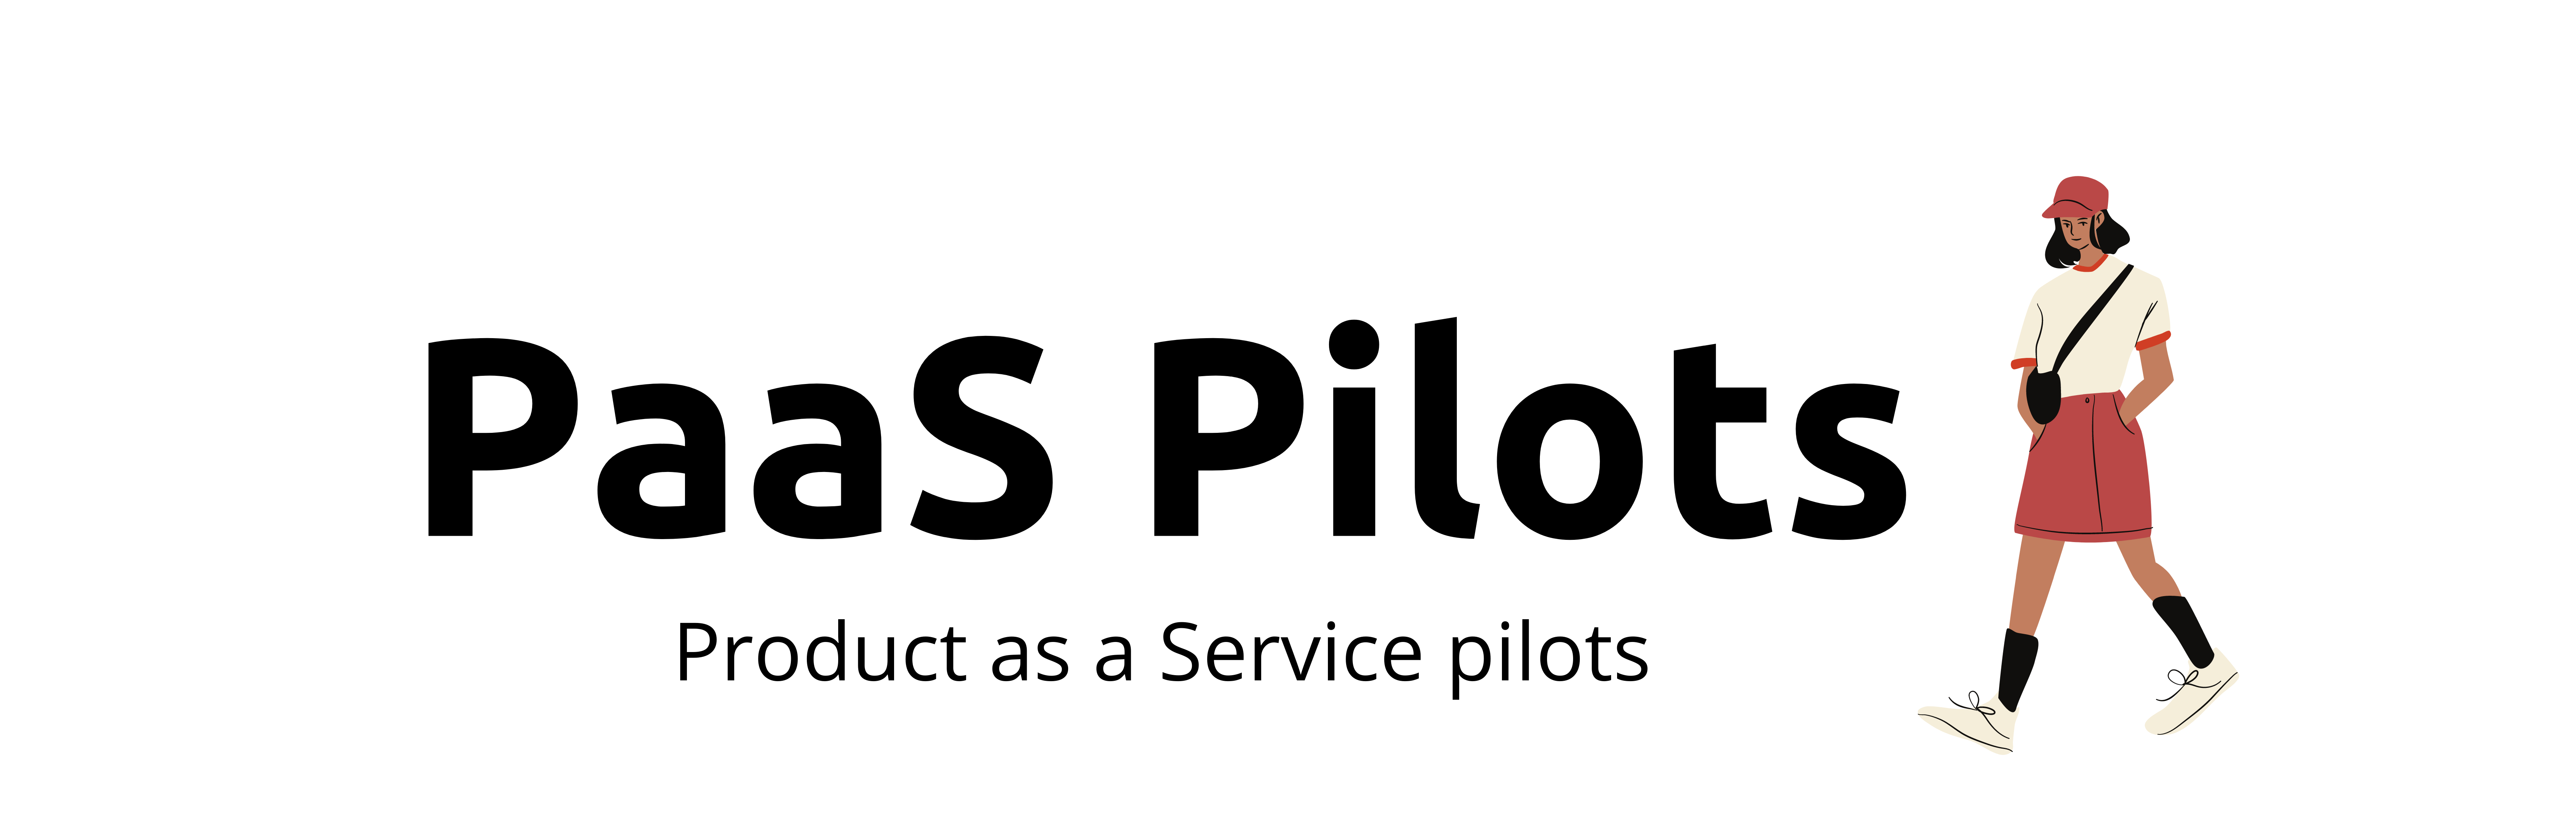 PaaS Pilots - Product as a Service pilots